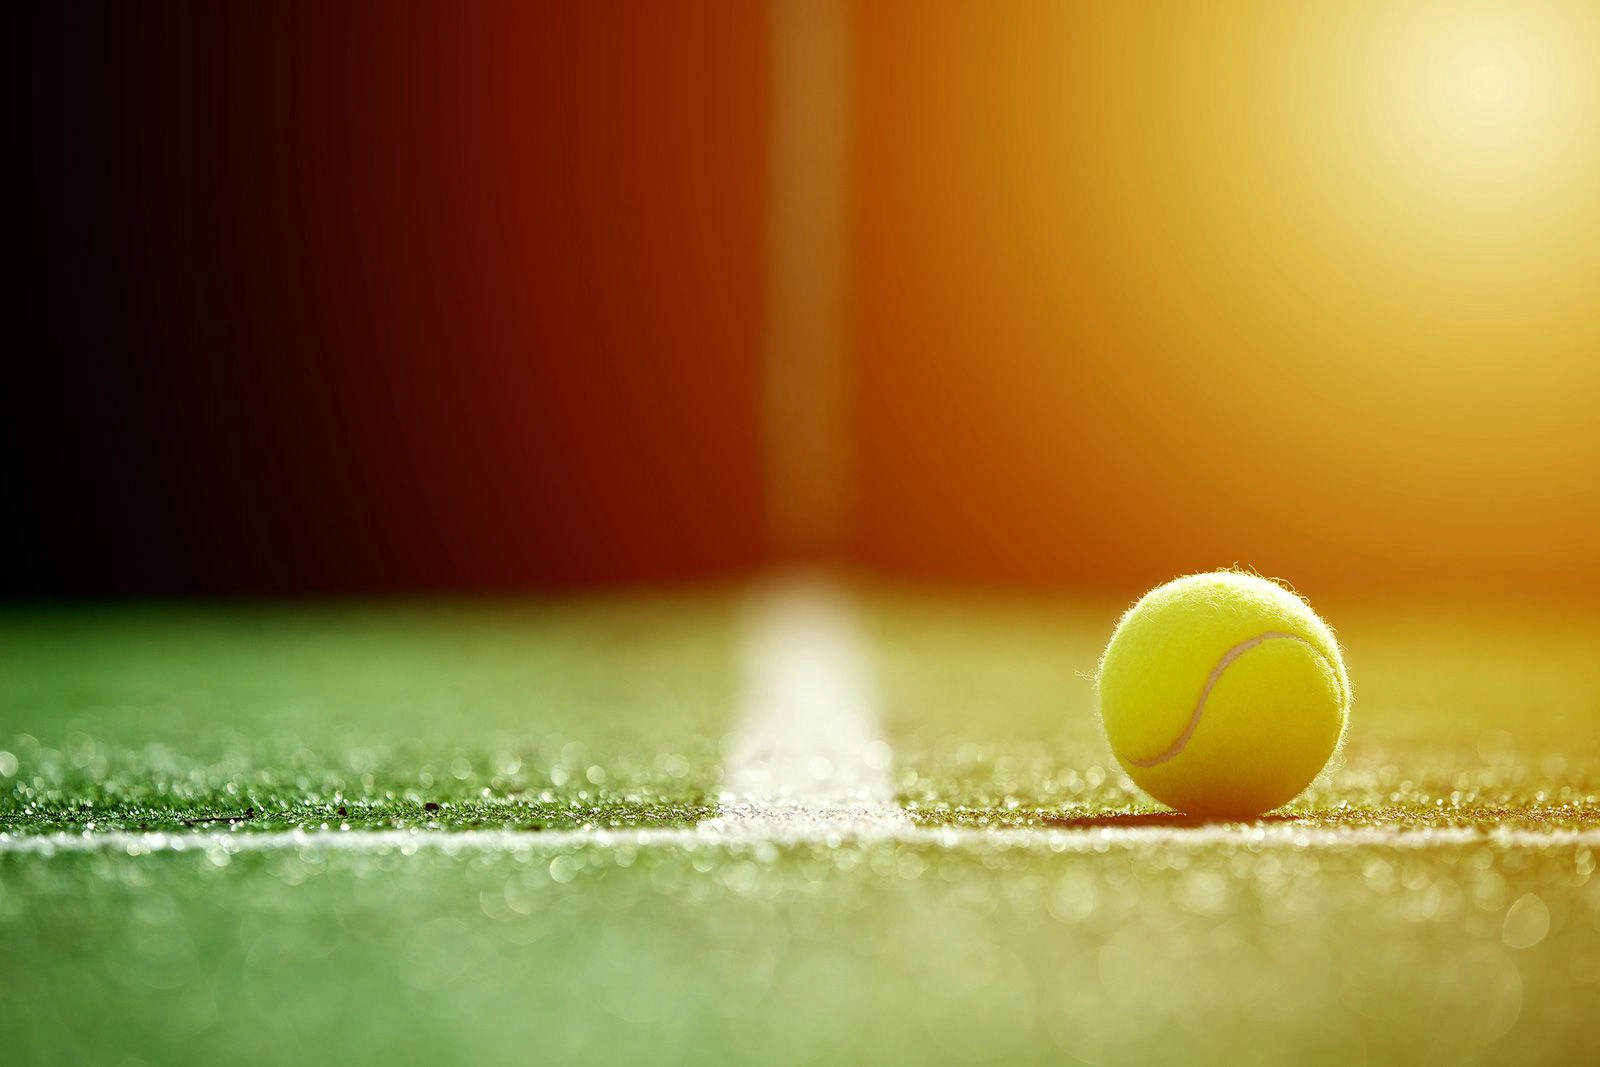 A tennis ball on the lines of a tennis court